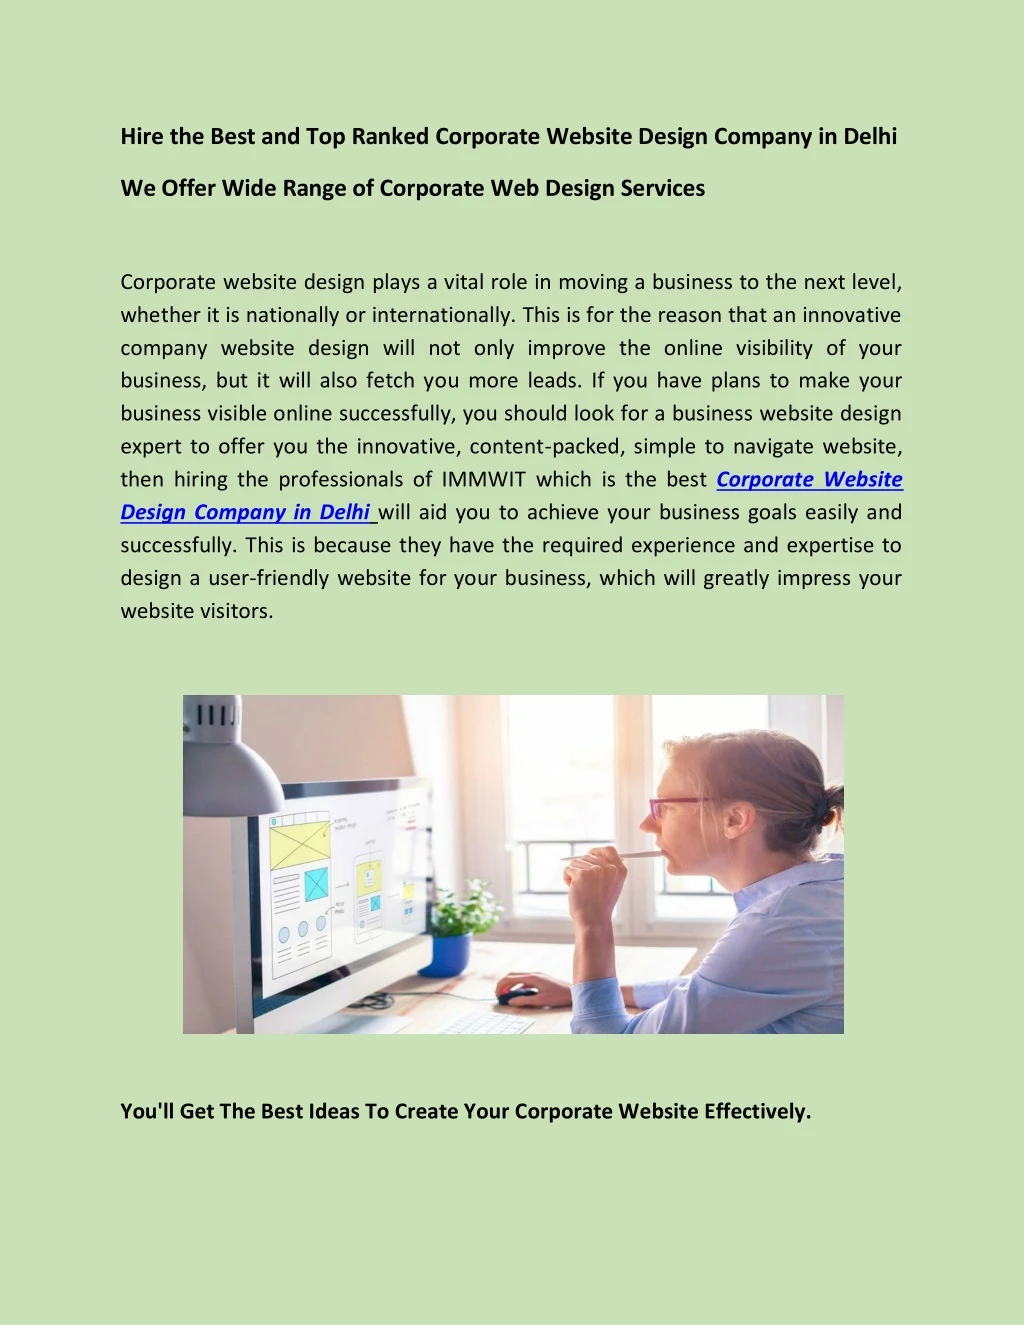 hire the best and top ranked corporate website